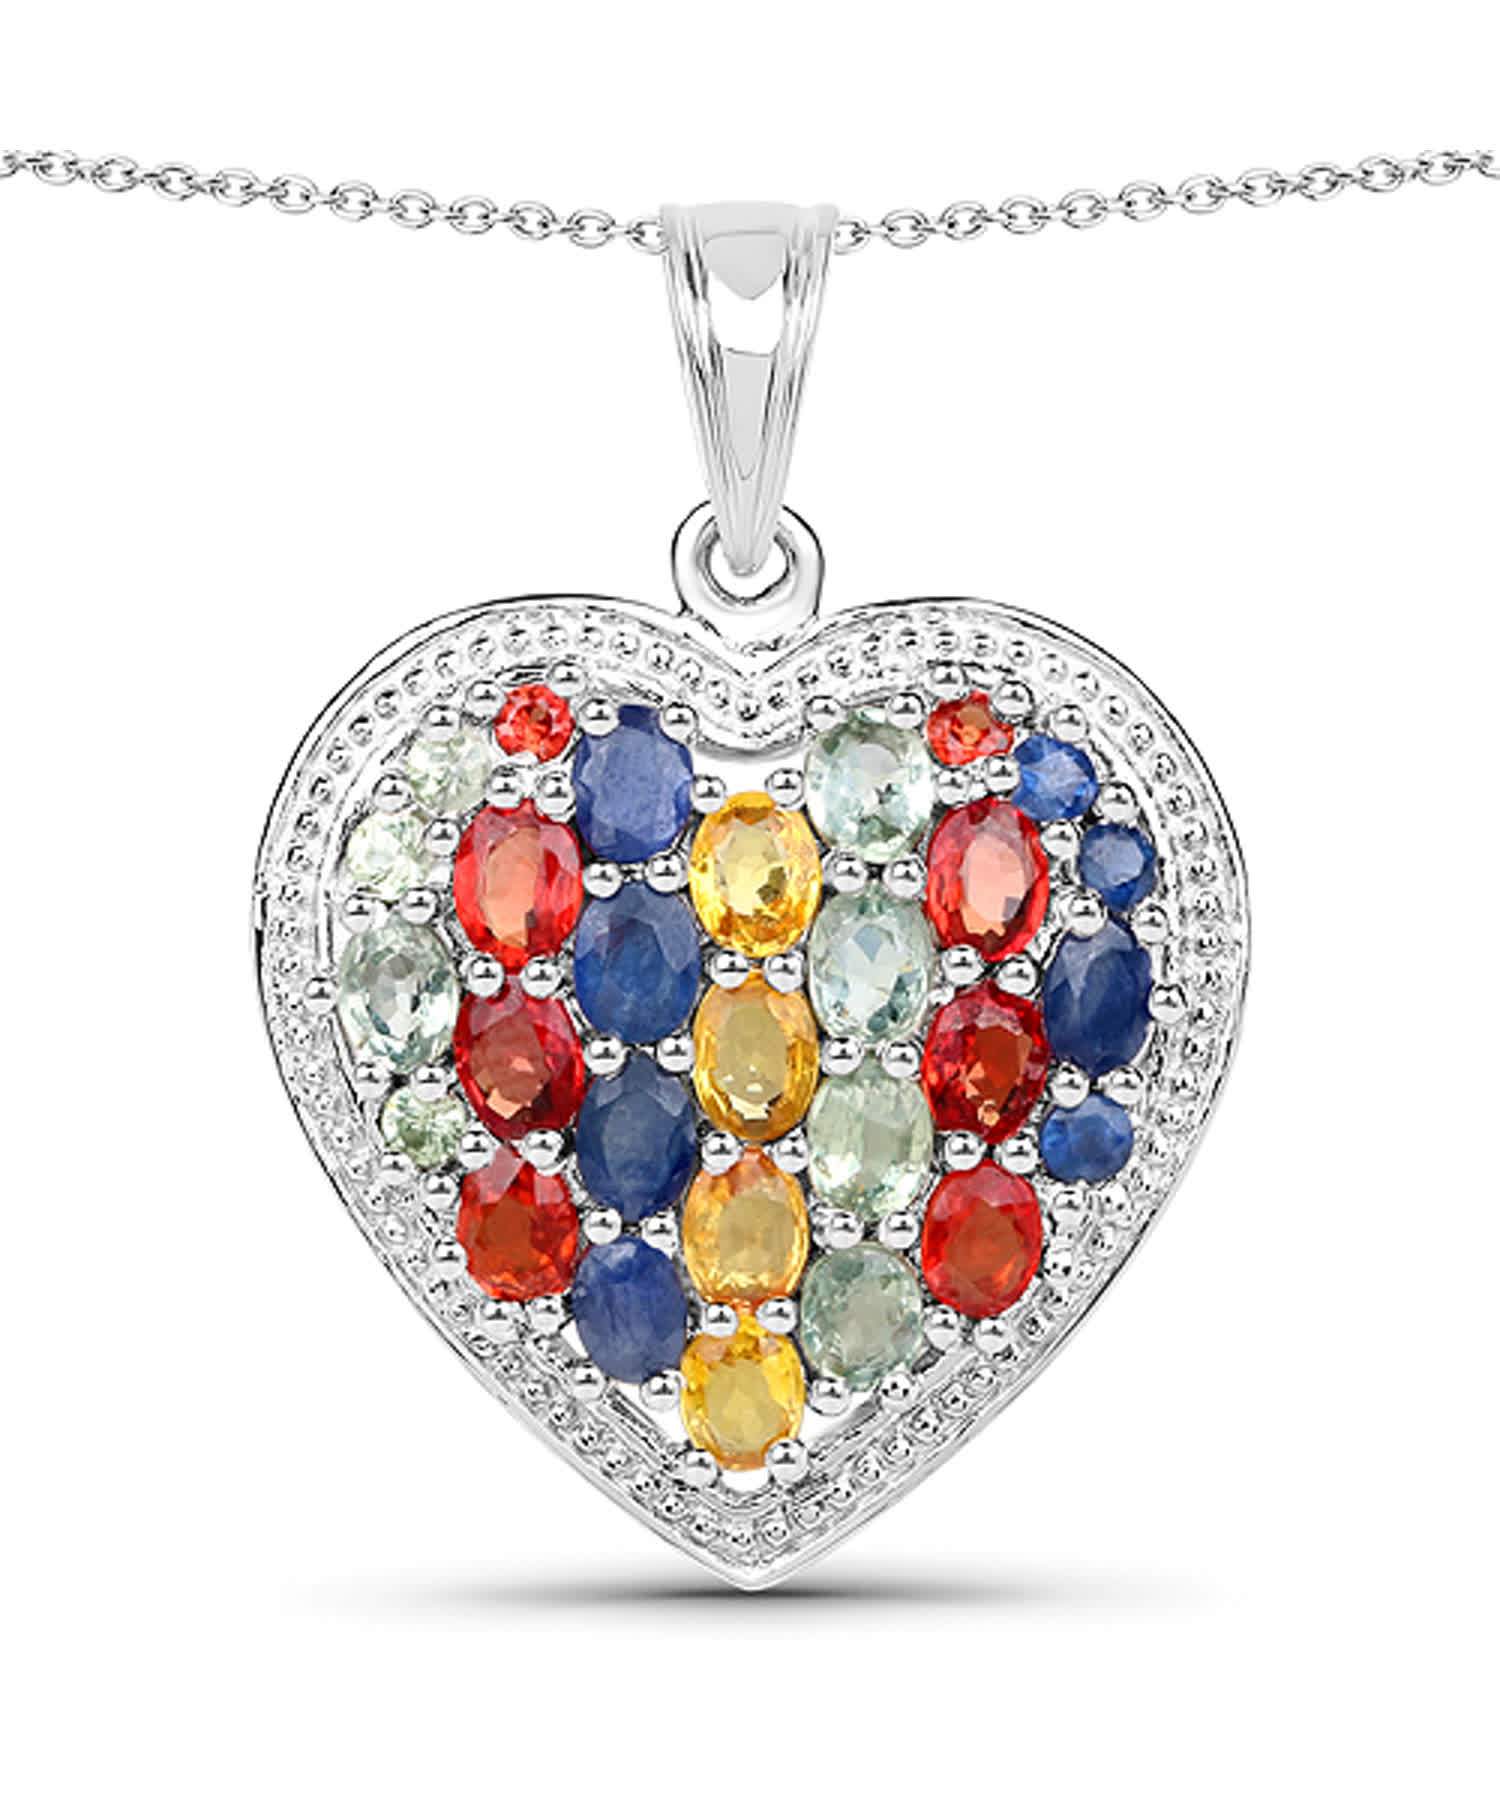 4.88ctw Natural Multi-Color Sapphire Rhodium Plated 925 Sterling Silver Heart Pendant With Chain View 1